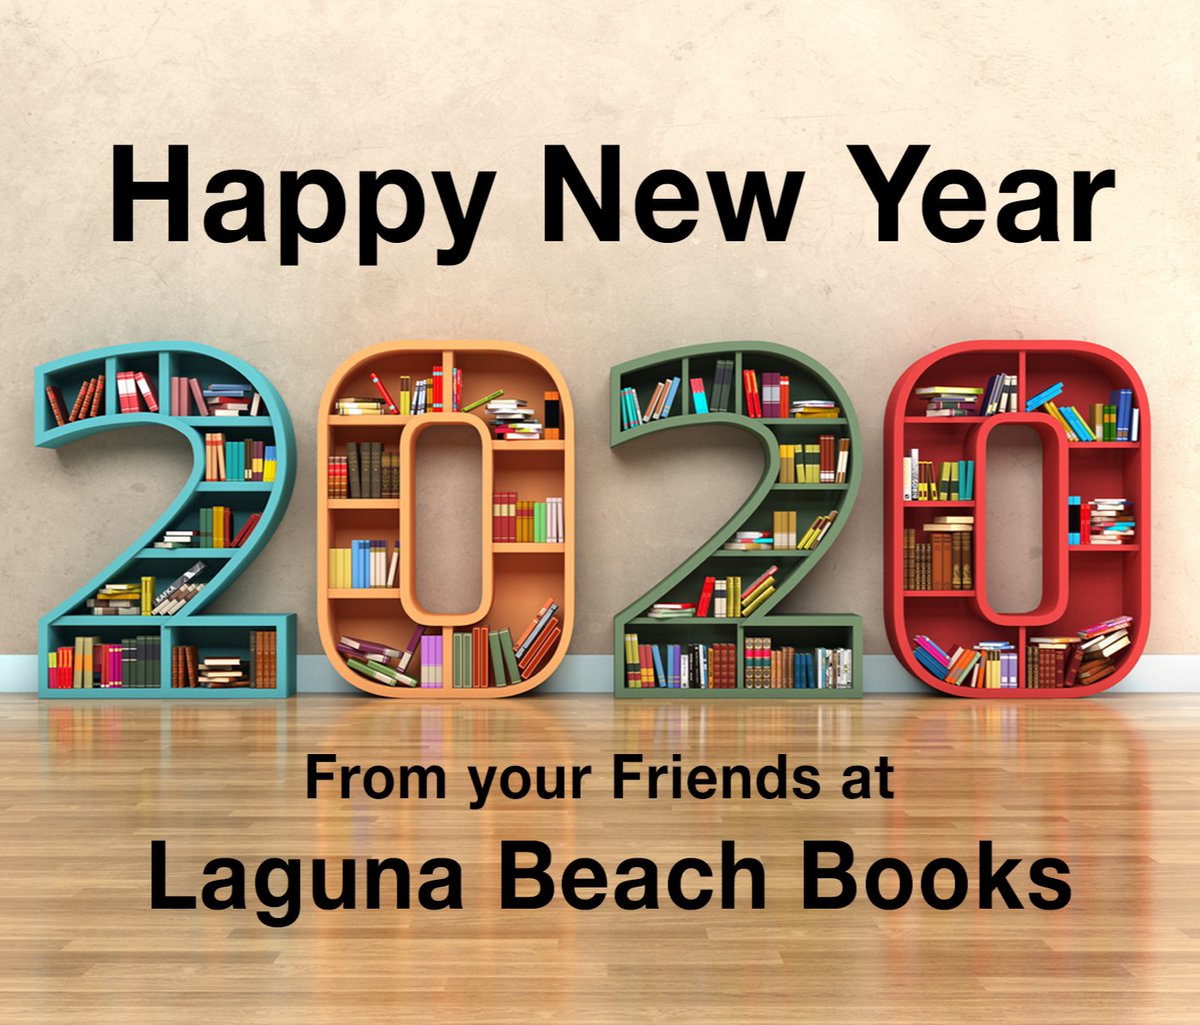 Wishing you a Happy New Years! So excited to start the new year! Thank you to all the LBB Supporters, we couldn't do It without you! #thankful #newyears #reading #lagunabeachbooks #newyearnewme